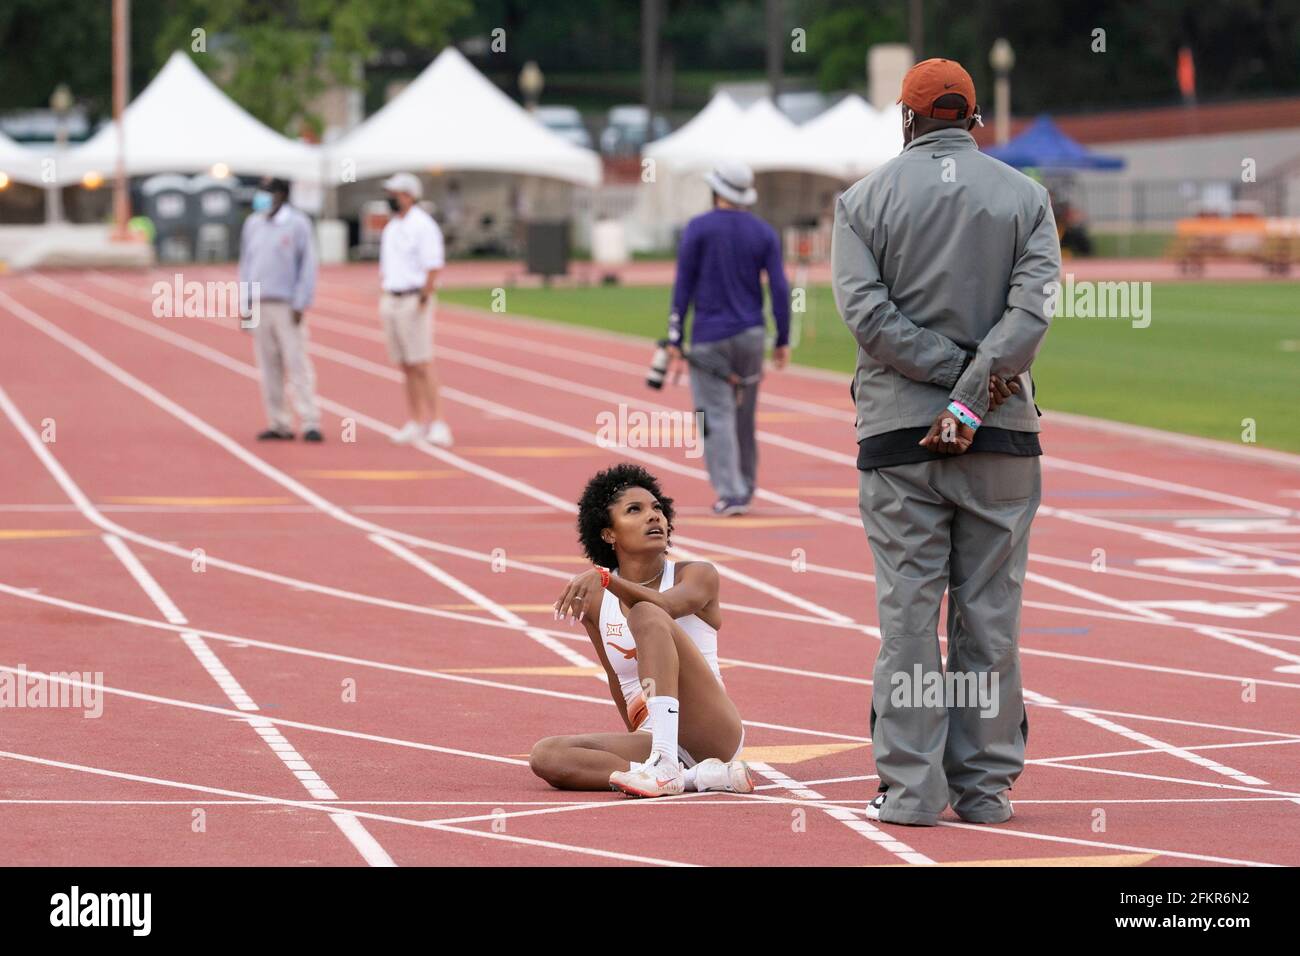 Austin, Texas, USA. 01st May, 2021. Texas women's long jump ace Tara Davis talks with coach Edrick Floreal after soaring to an easy victory at the Texas Invitational as she continues a quest for a spot on the 2021 U.S. Olympic team. Credit: Bob Daemmrich/Alamy Live News Credit: Bob Daemmrich/Alamy Live News Stock Photo